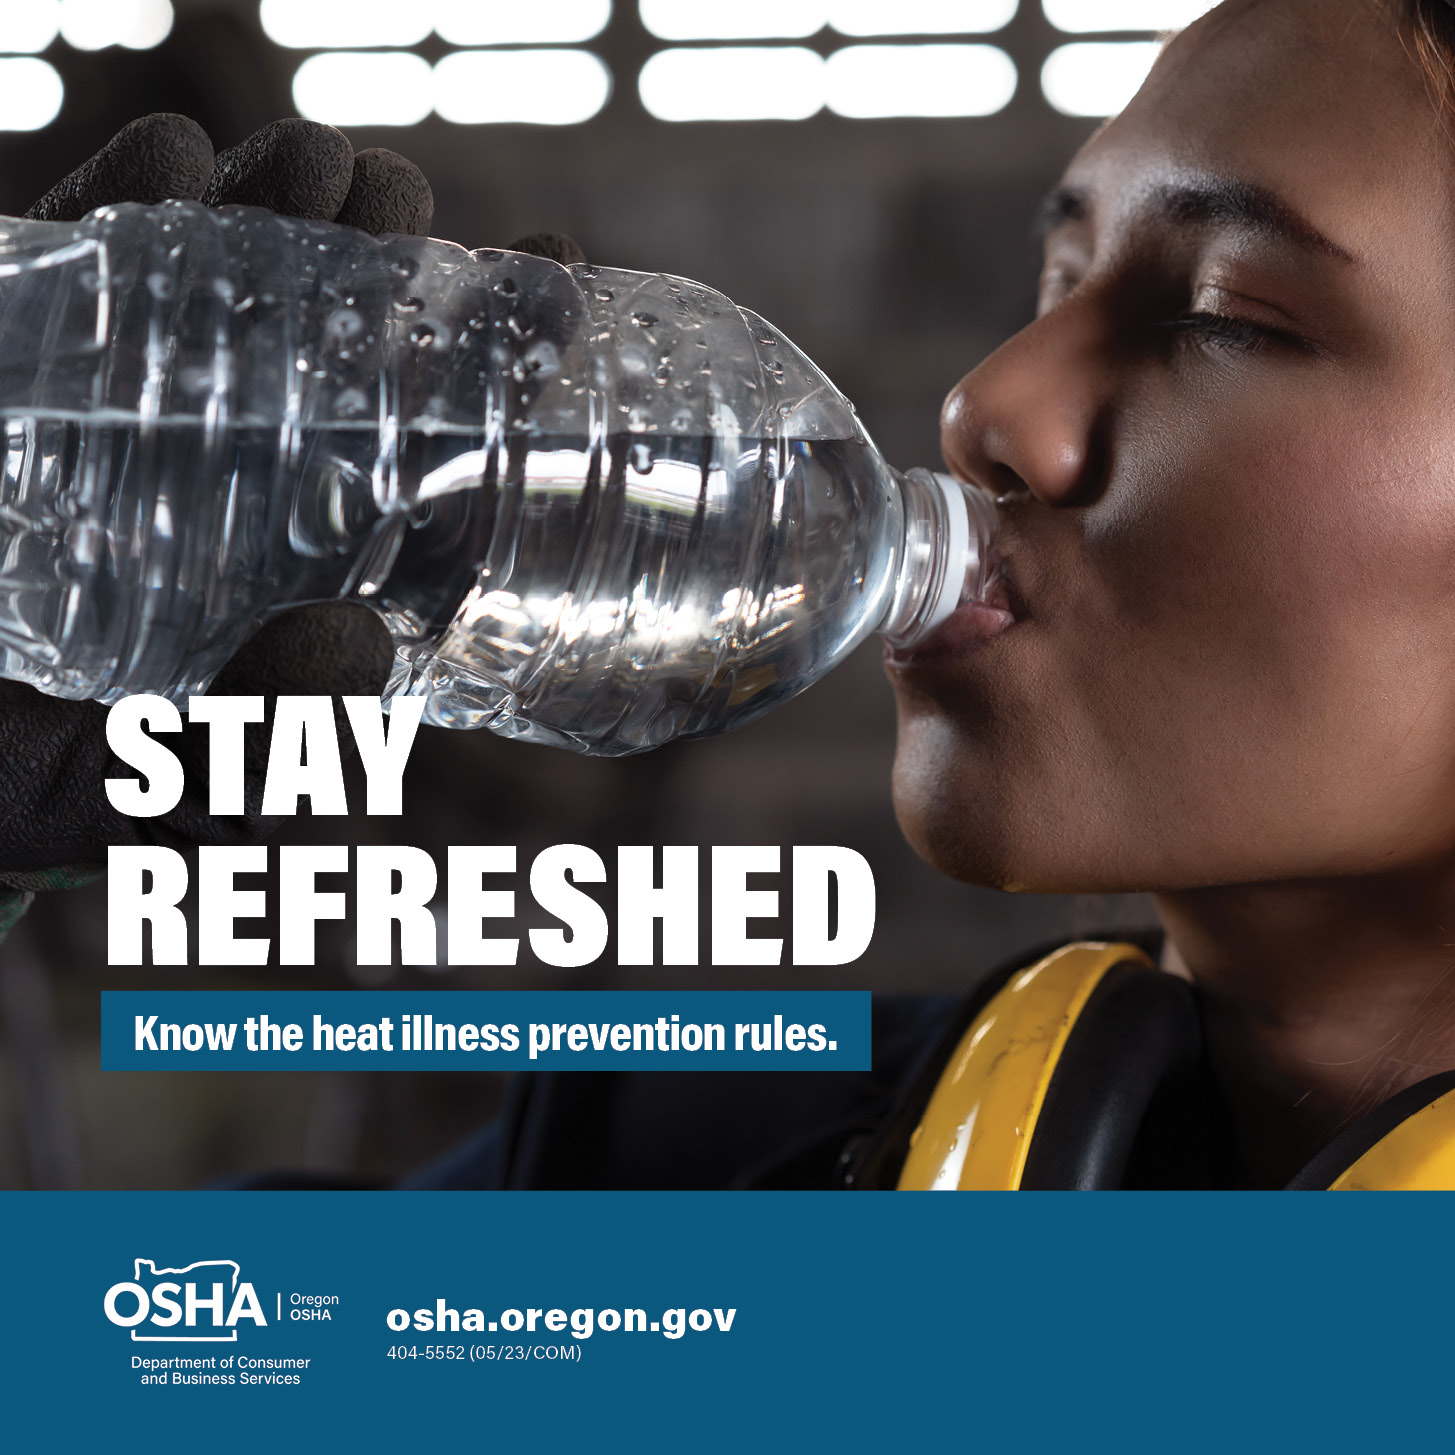 picture of person drinking from water bottle with text: Stay Refreshed. Know the heat illness prevention rules